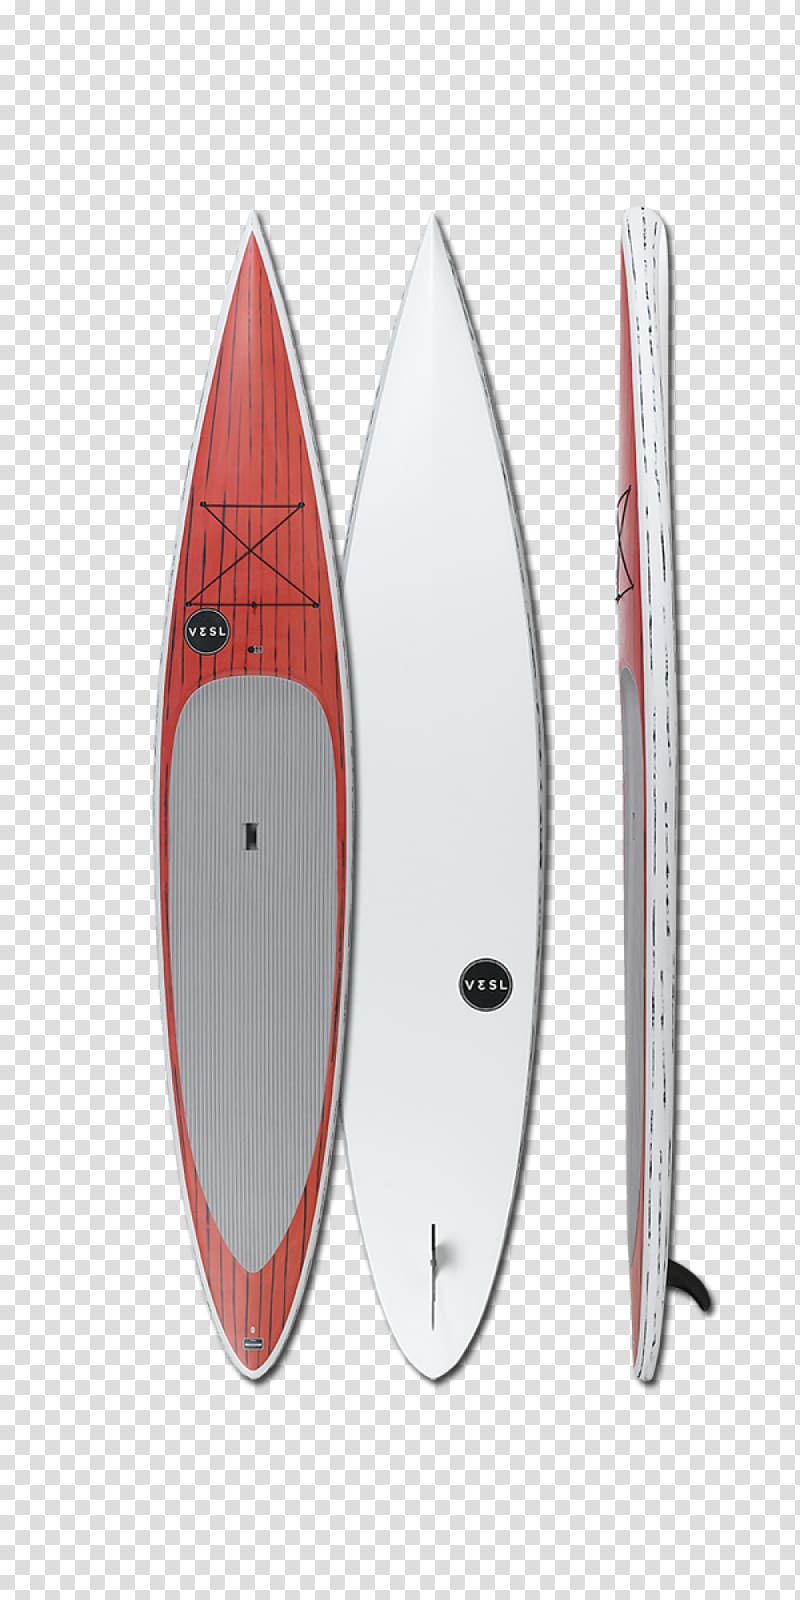 Surfboard Standup paddleboarding Surfing, Paddle Board transparent background PNG clipart